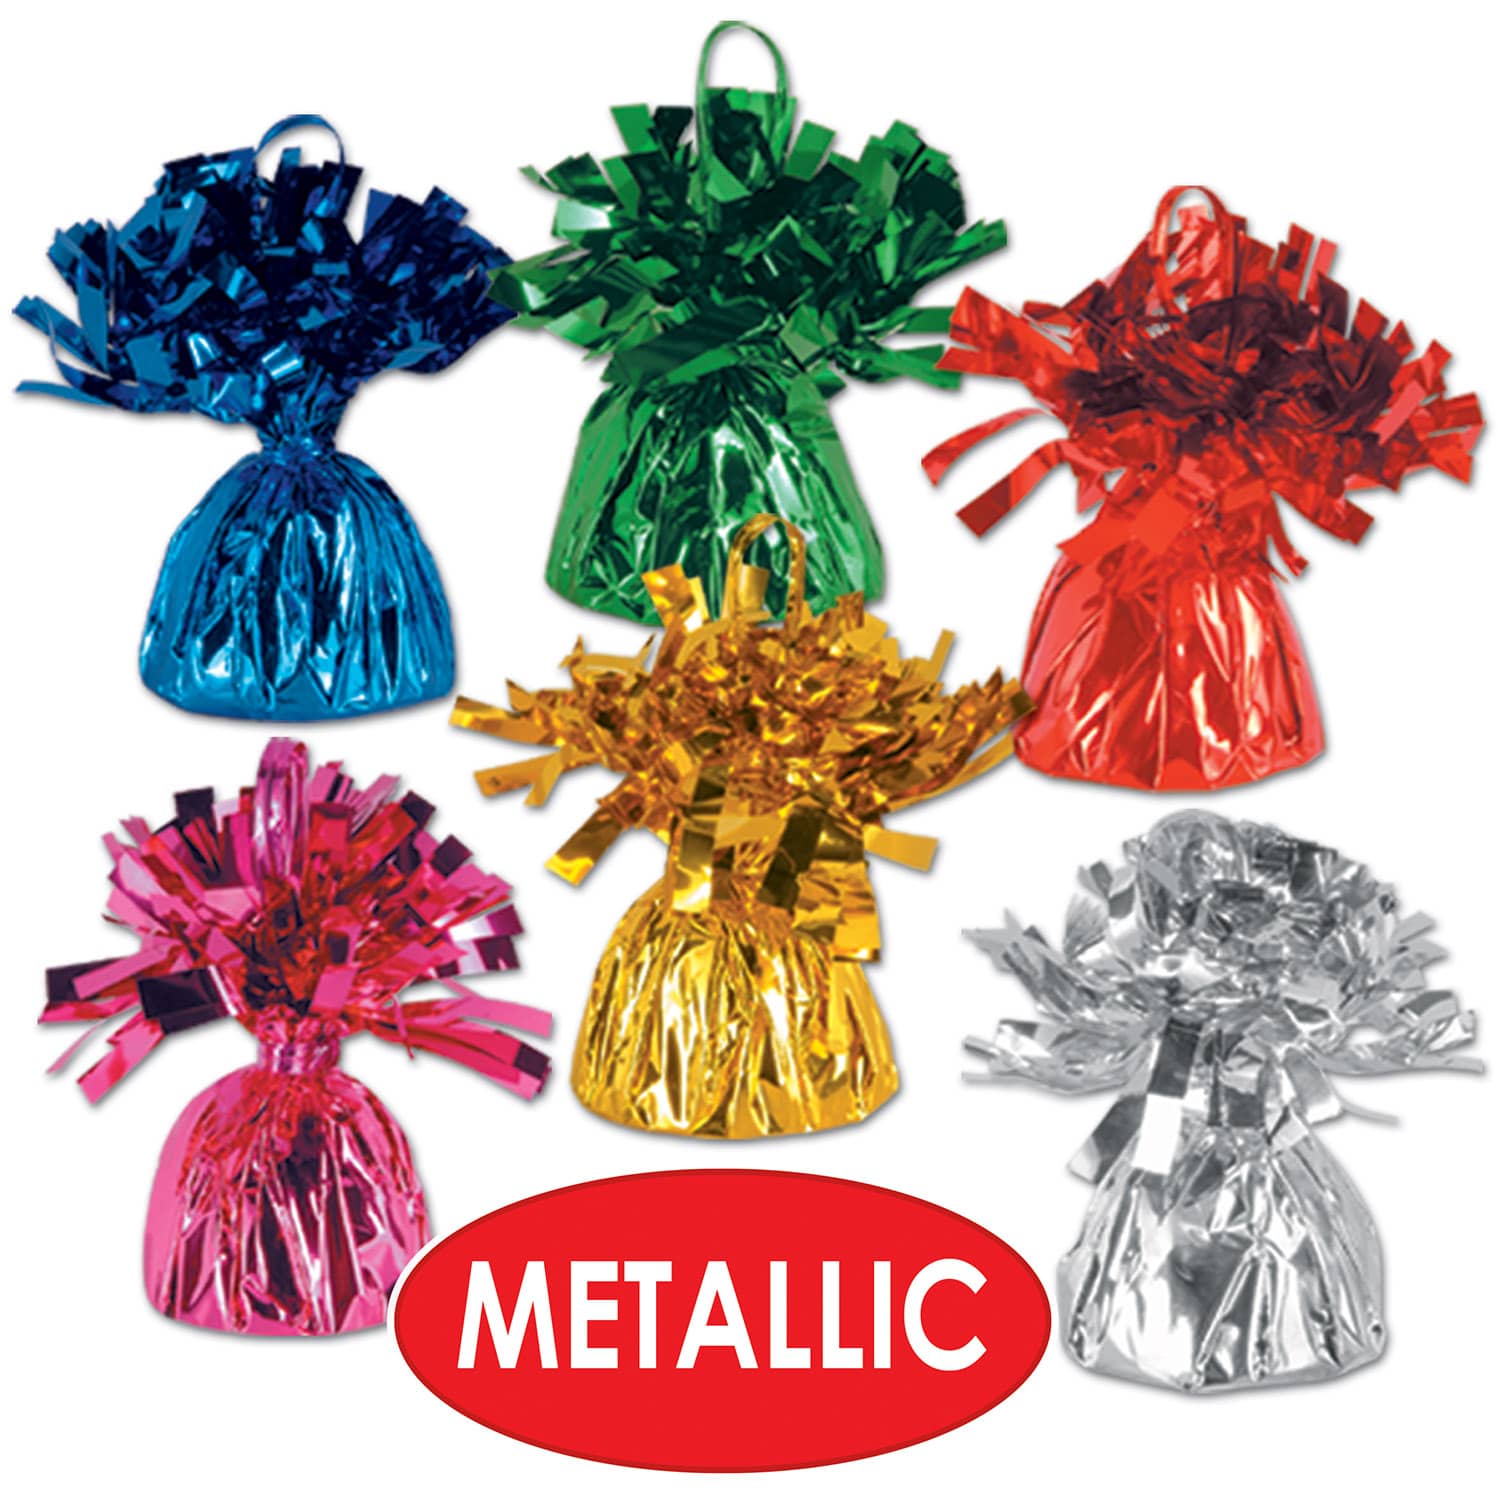 Assorted Metallic Wrapped Balloon Weights (Pack of 12) metallic, wrapped, balloon, weights, pack, party, table, decoration, centerpiece, favor, celebration, event, bar, restaurant, hotel, casino, favor, decoration, new year's eve, christmas, valentine's day, halloween, wholesale, inexpensive, bulk